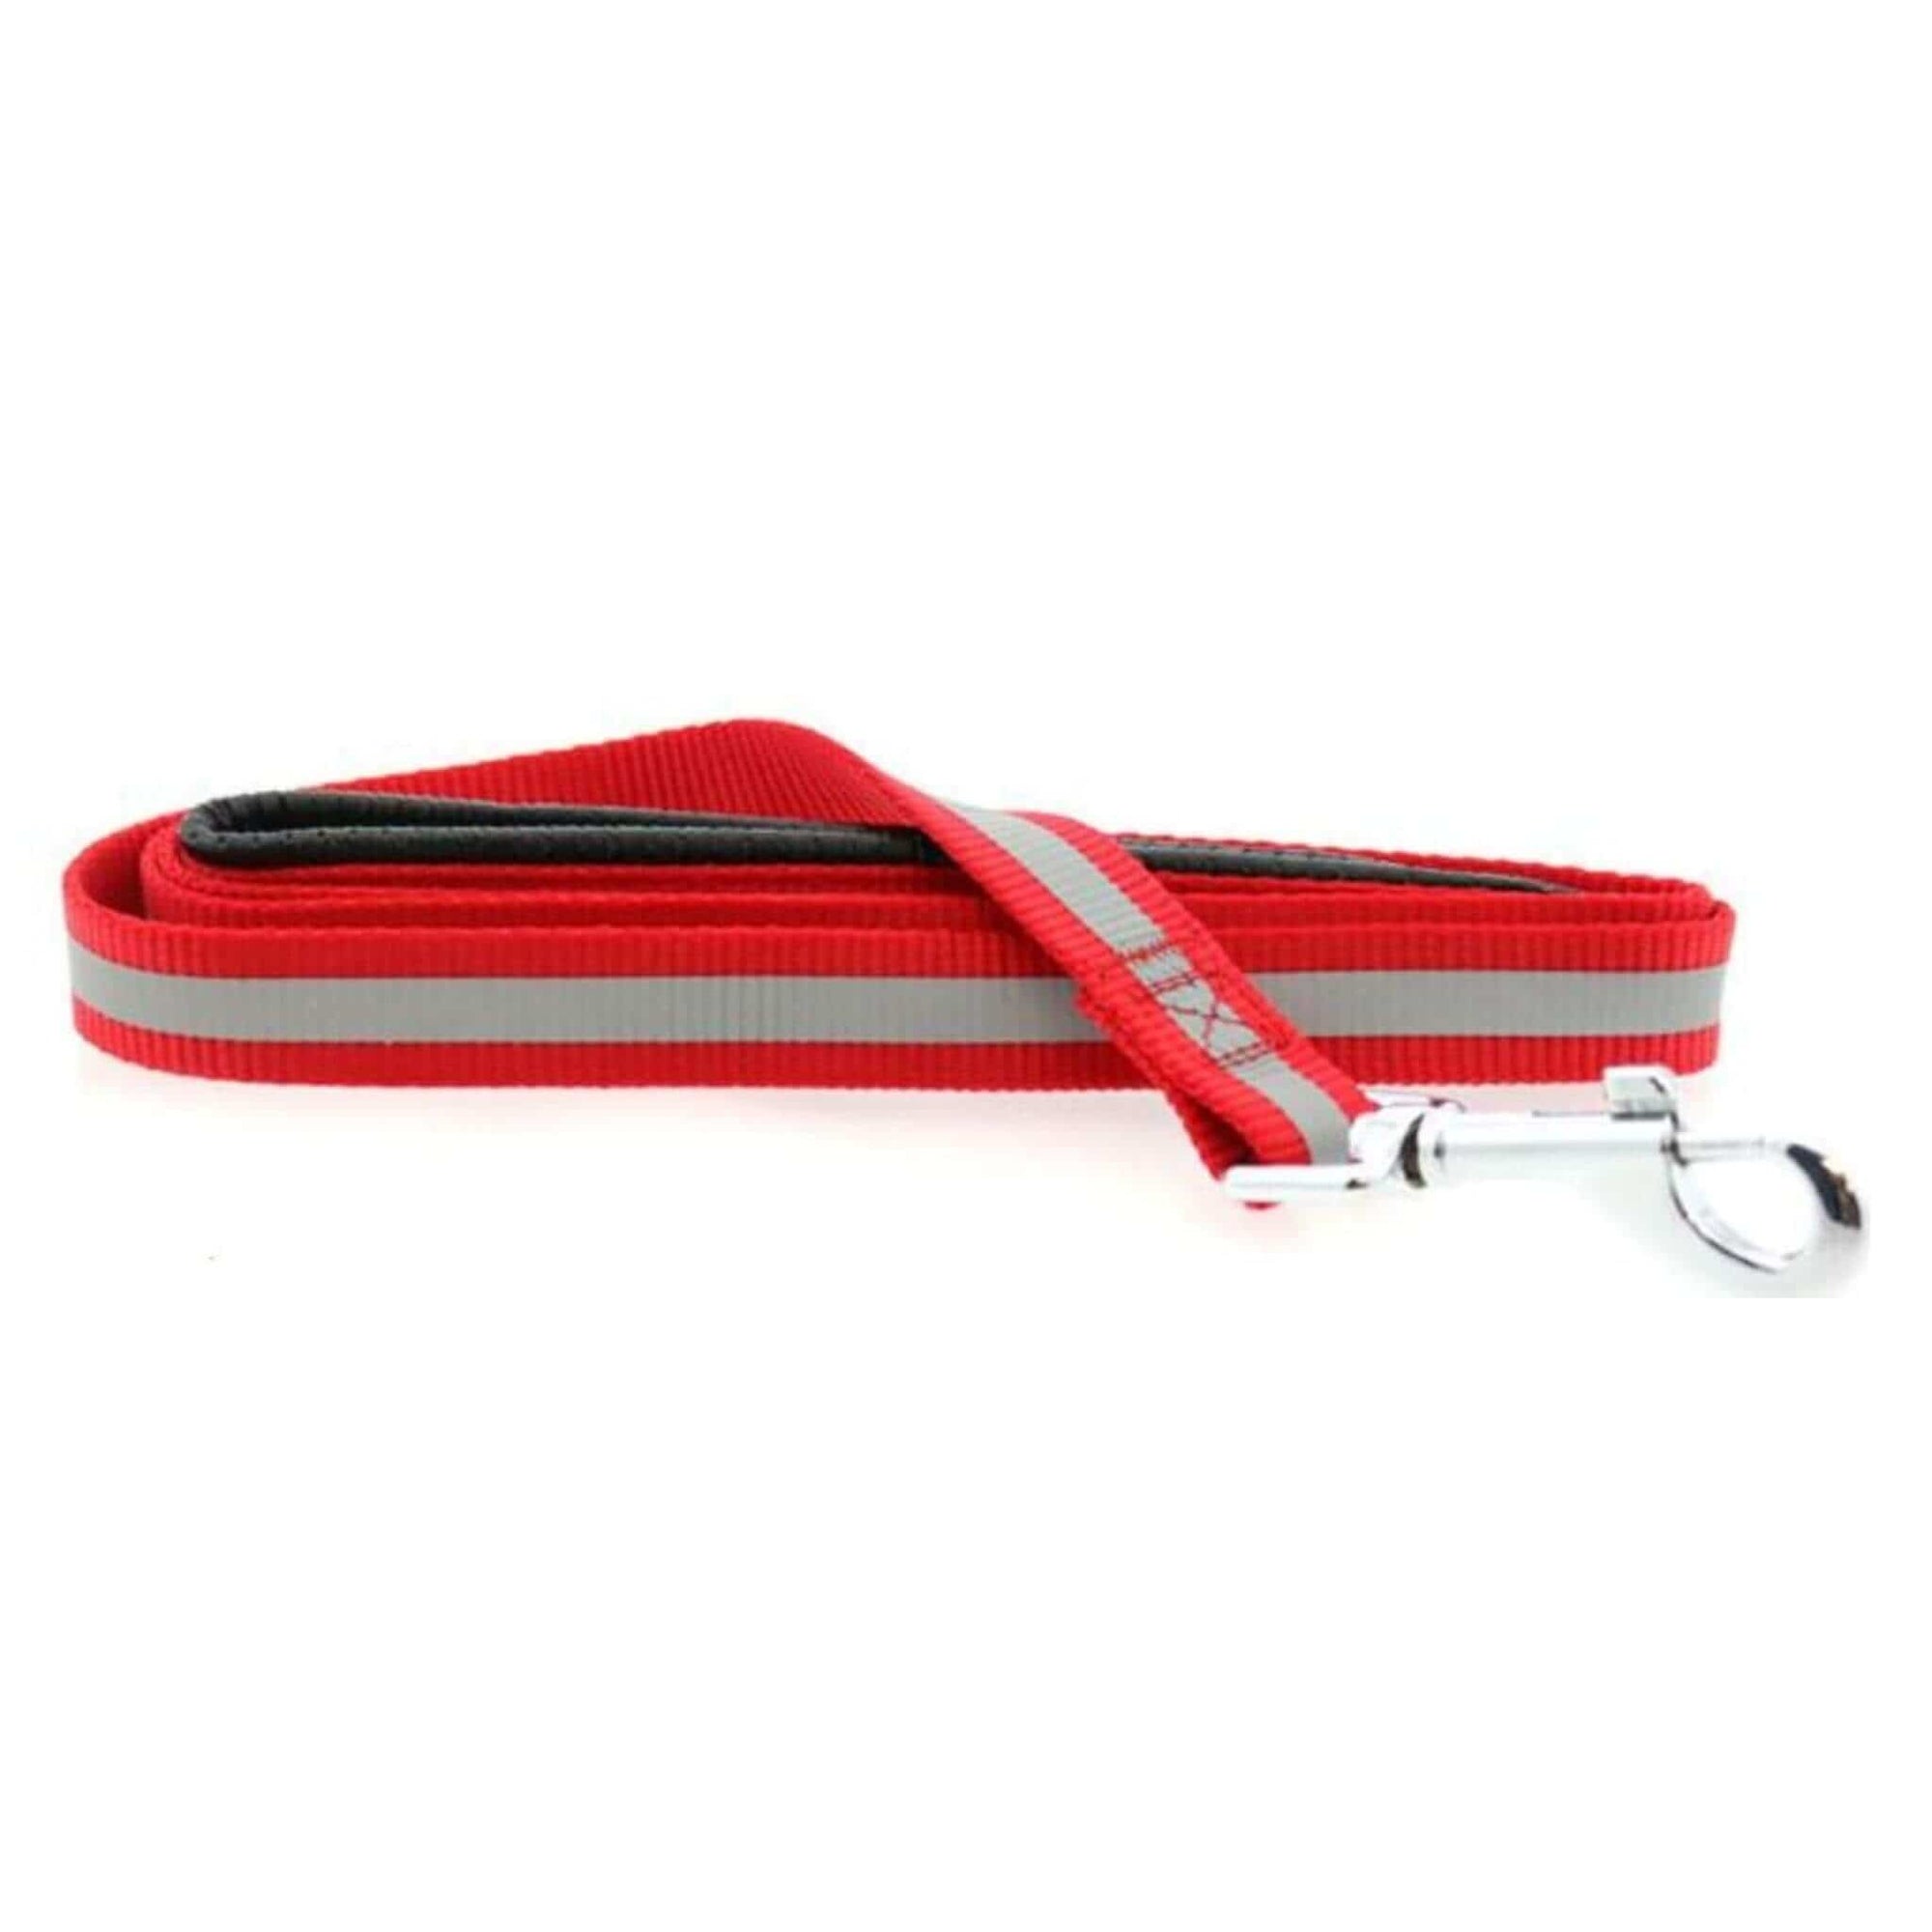 American River Reflective Dog Leash - Red